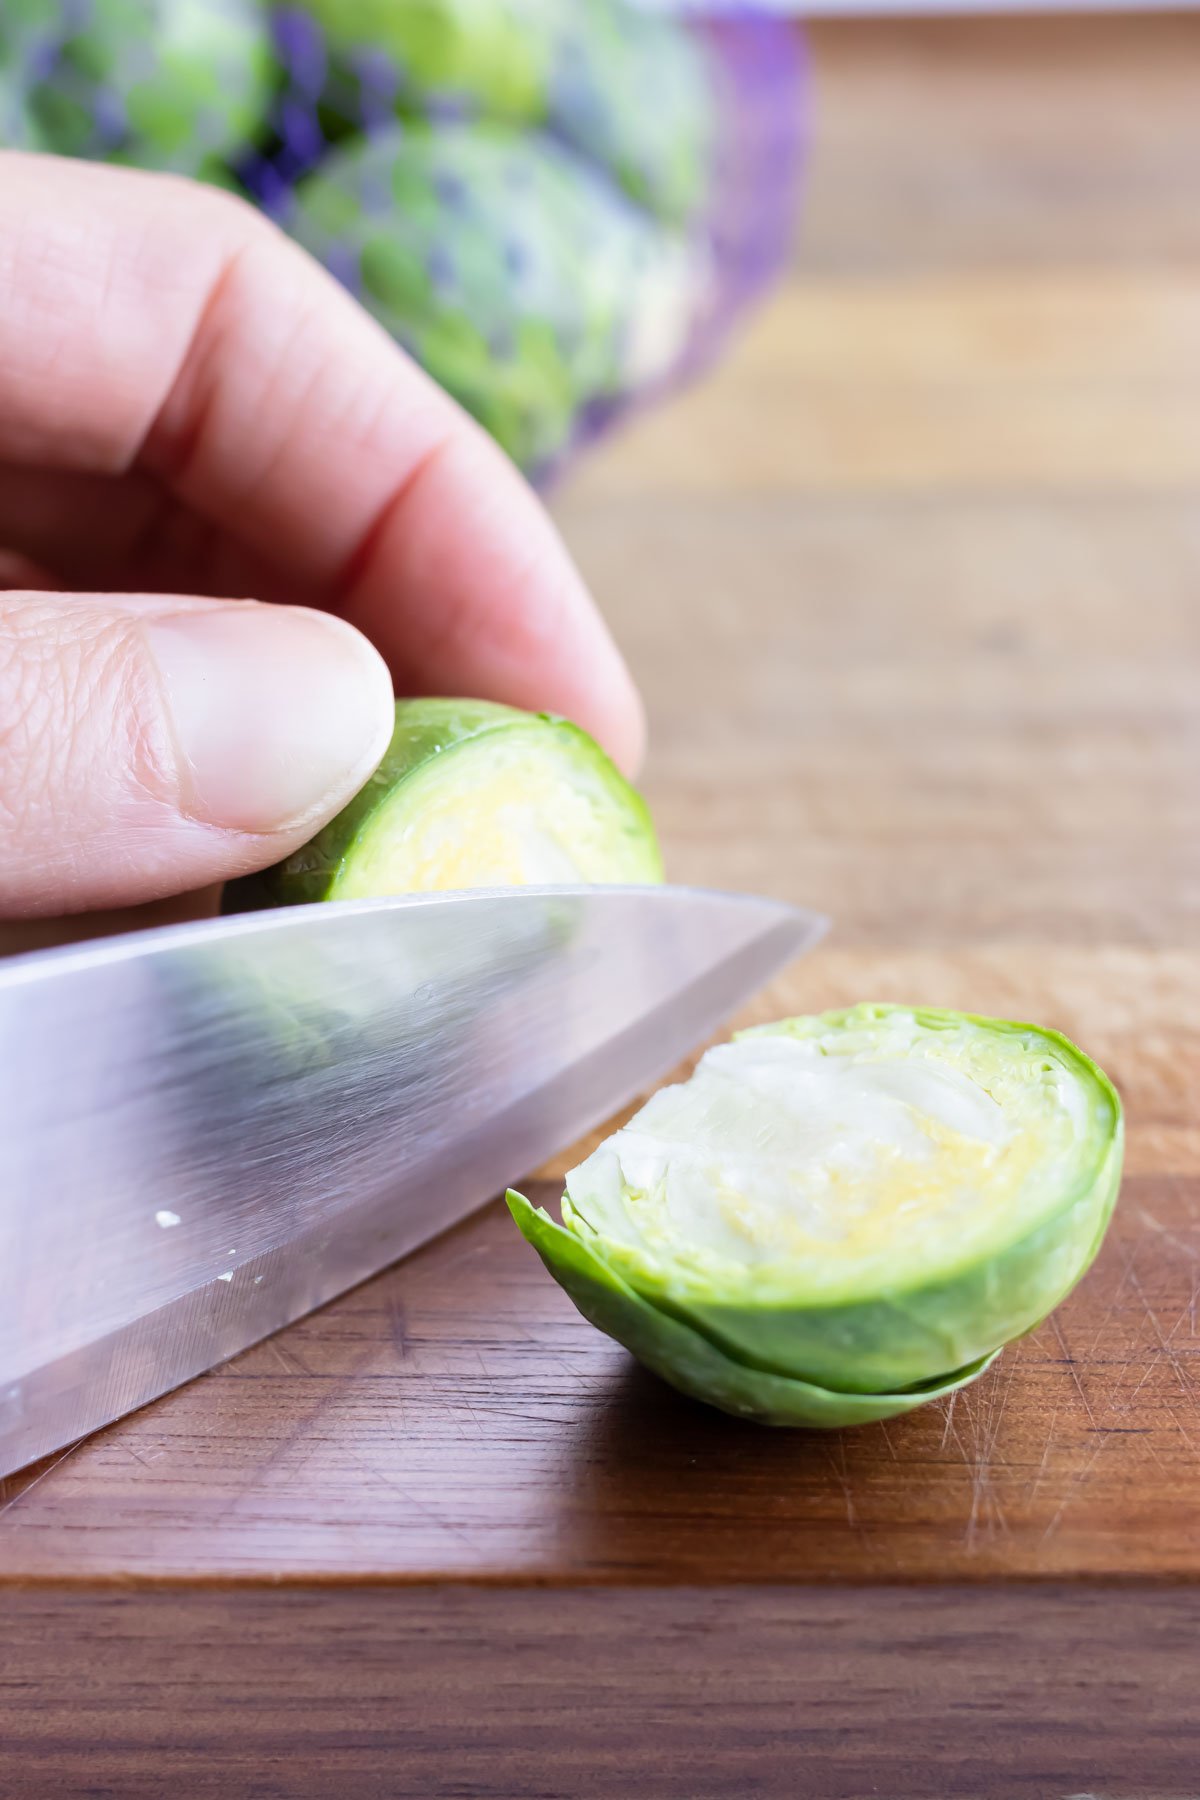 Brussels sprouts are chopped with a large knife on a cutting board.